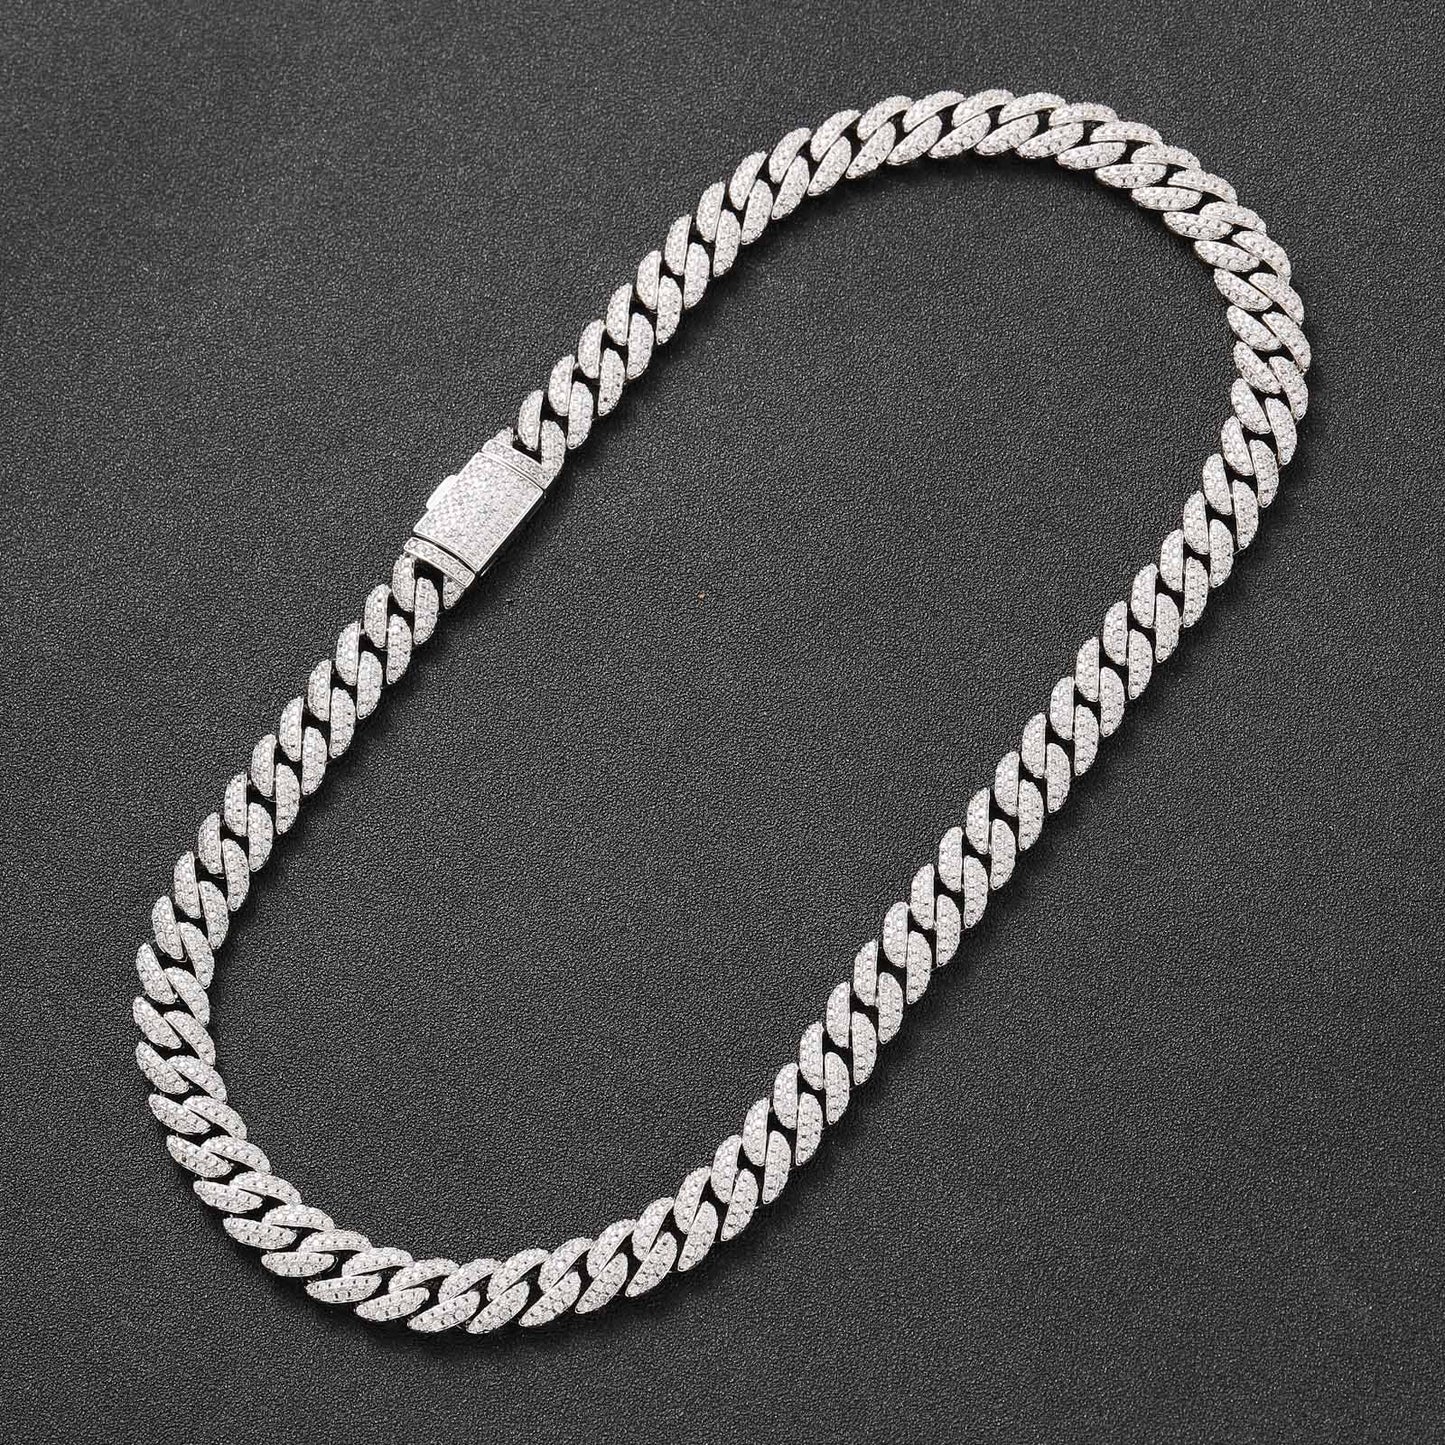 European American Necklace 10mm Double Row Zircon Cuban Link Chain Men Necklace Personality Hip Hop Fashion Jewelry